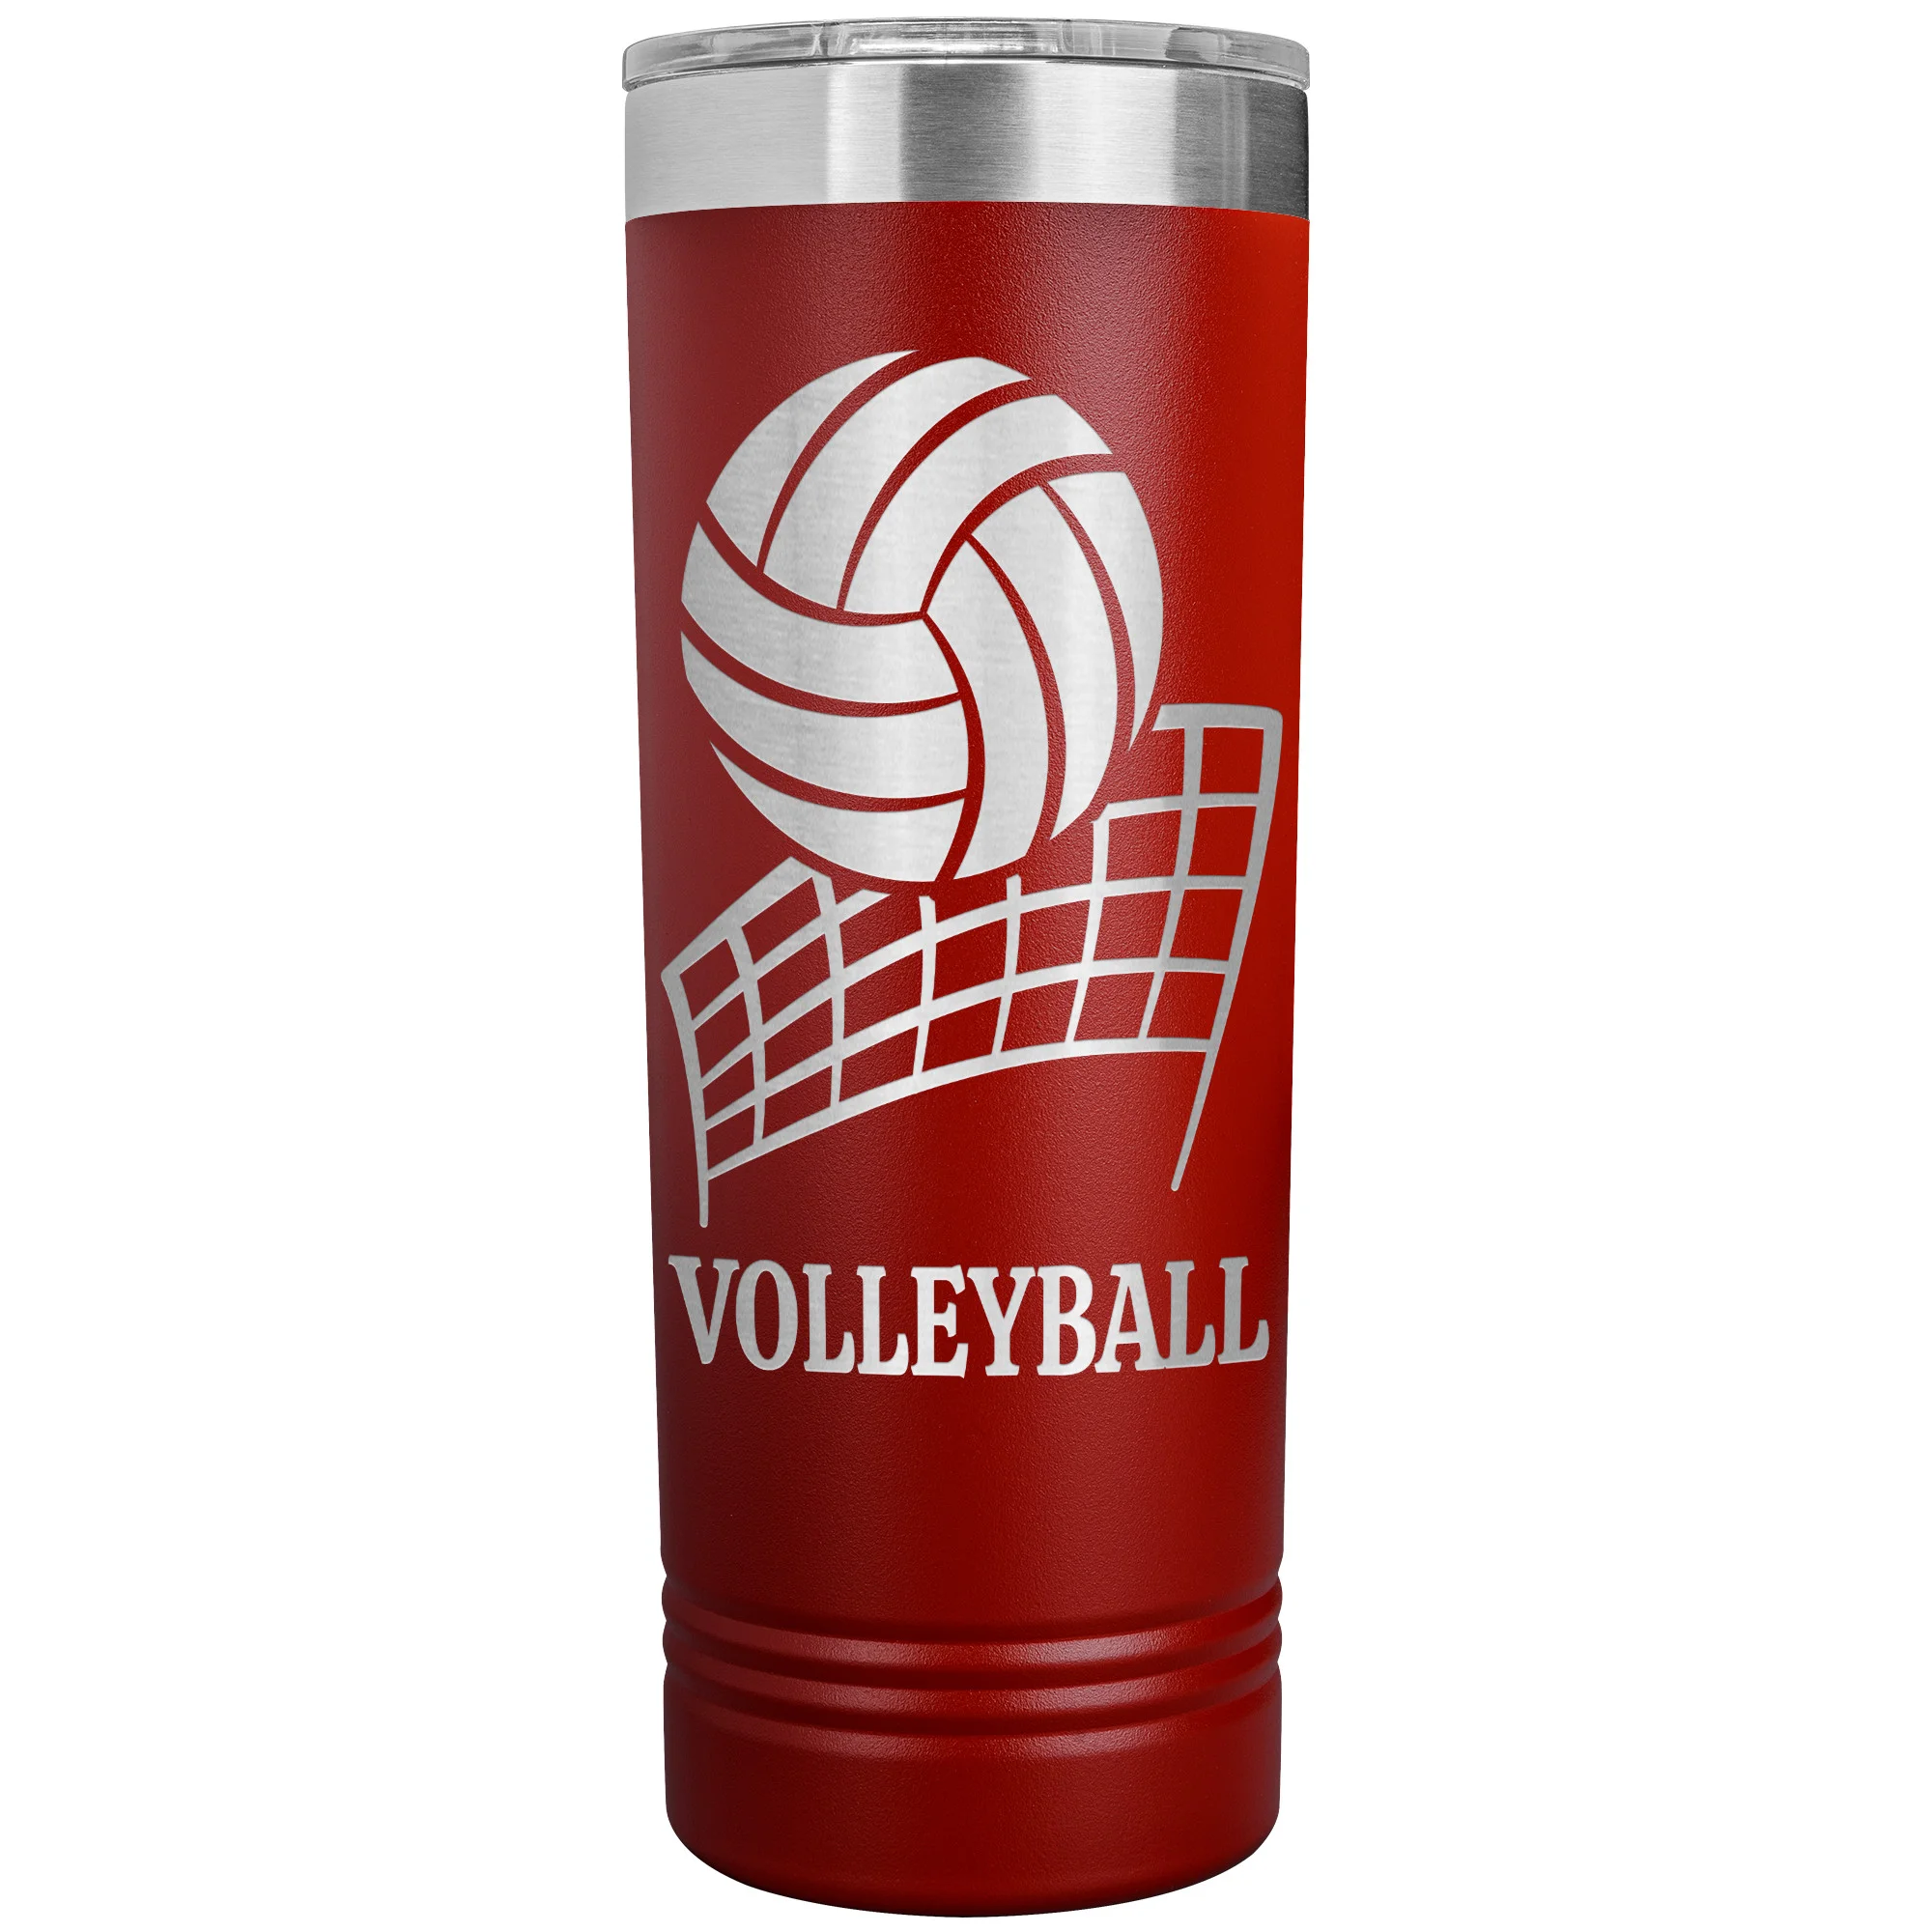 https://www.personalsportsgifts.com/wp-content/uploads/sites/7/2022/10/personalized-volleyball-tumbler-red.jpg.webp